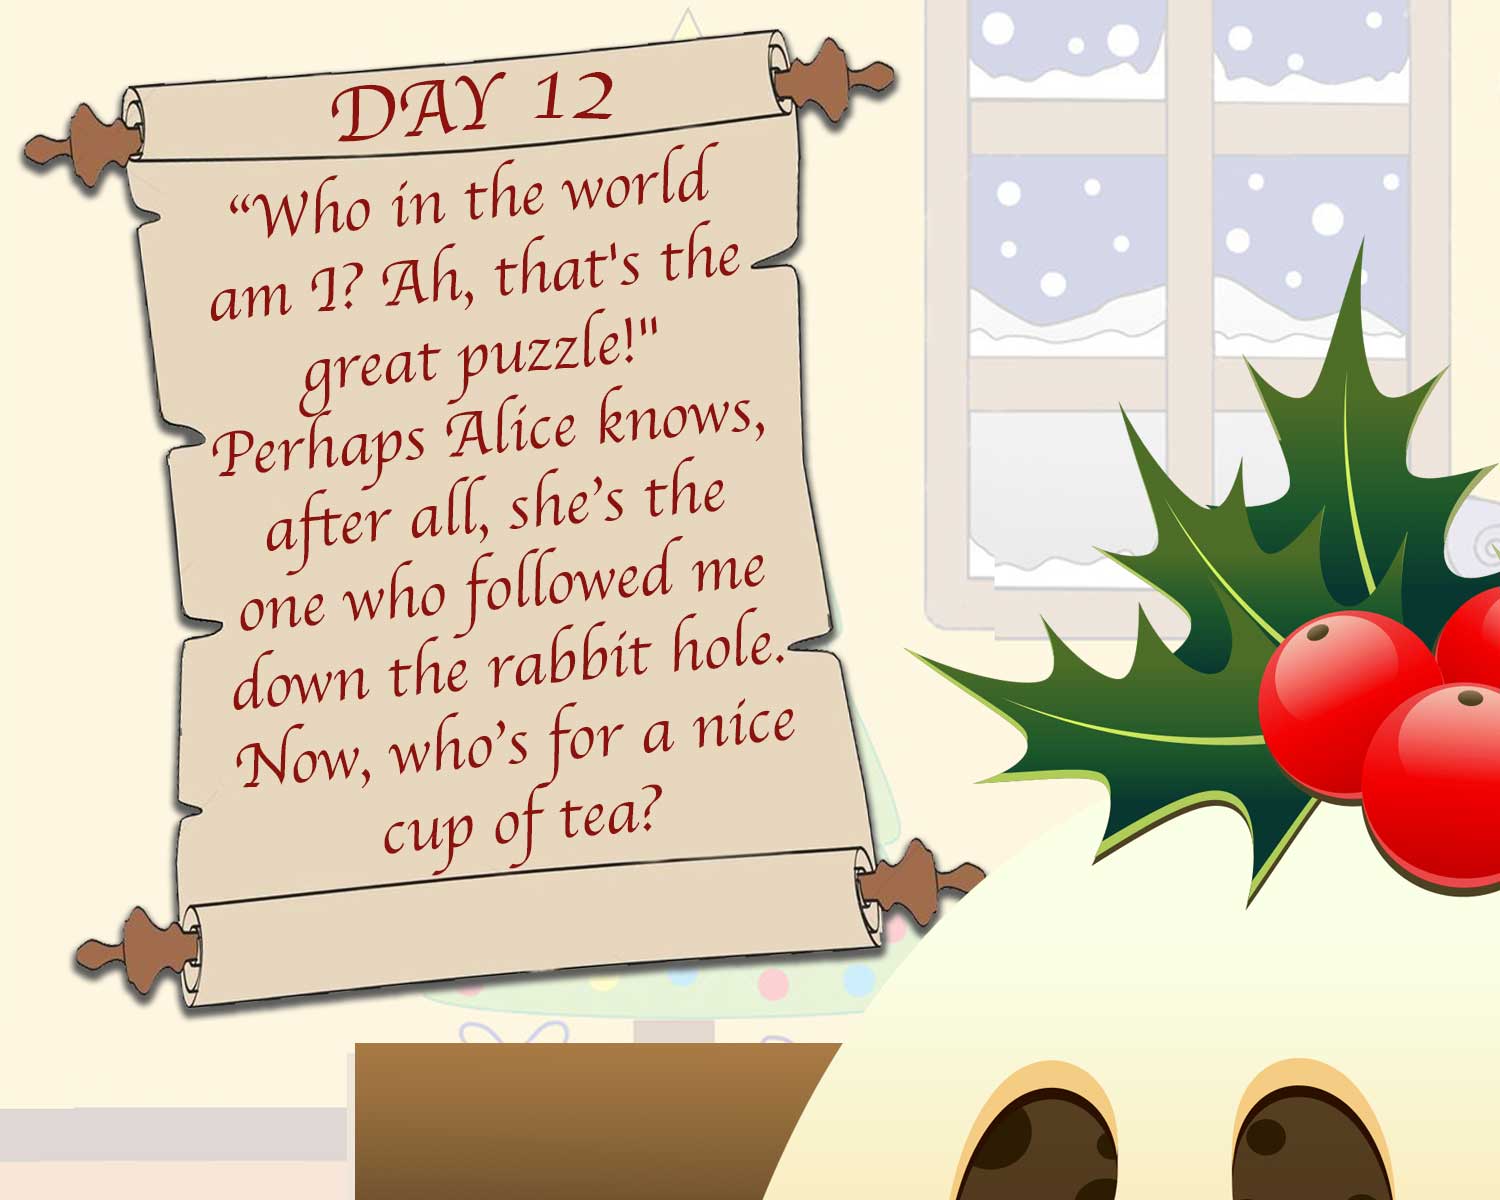 DAY 12 - THE GREAT CHRISTMAS PUDDING HUNT